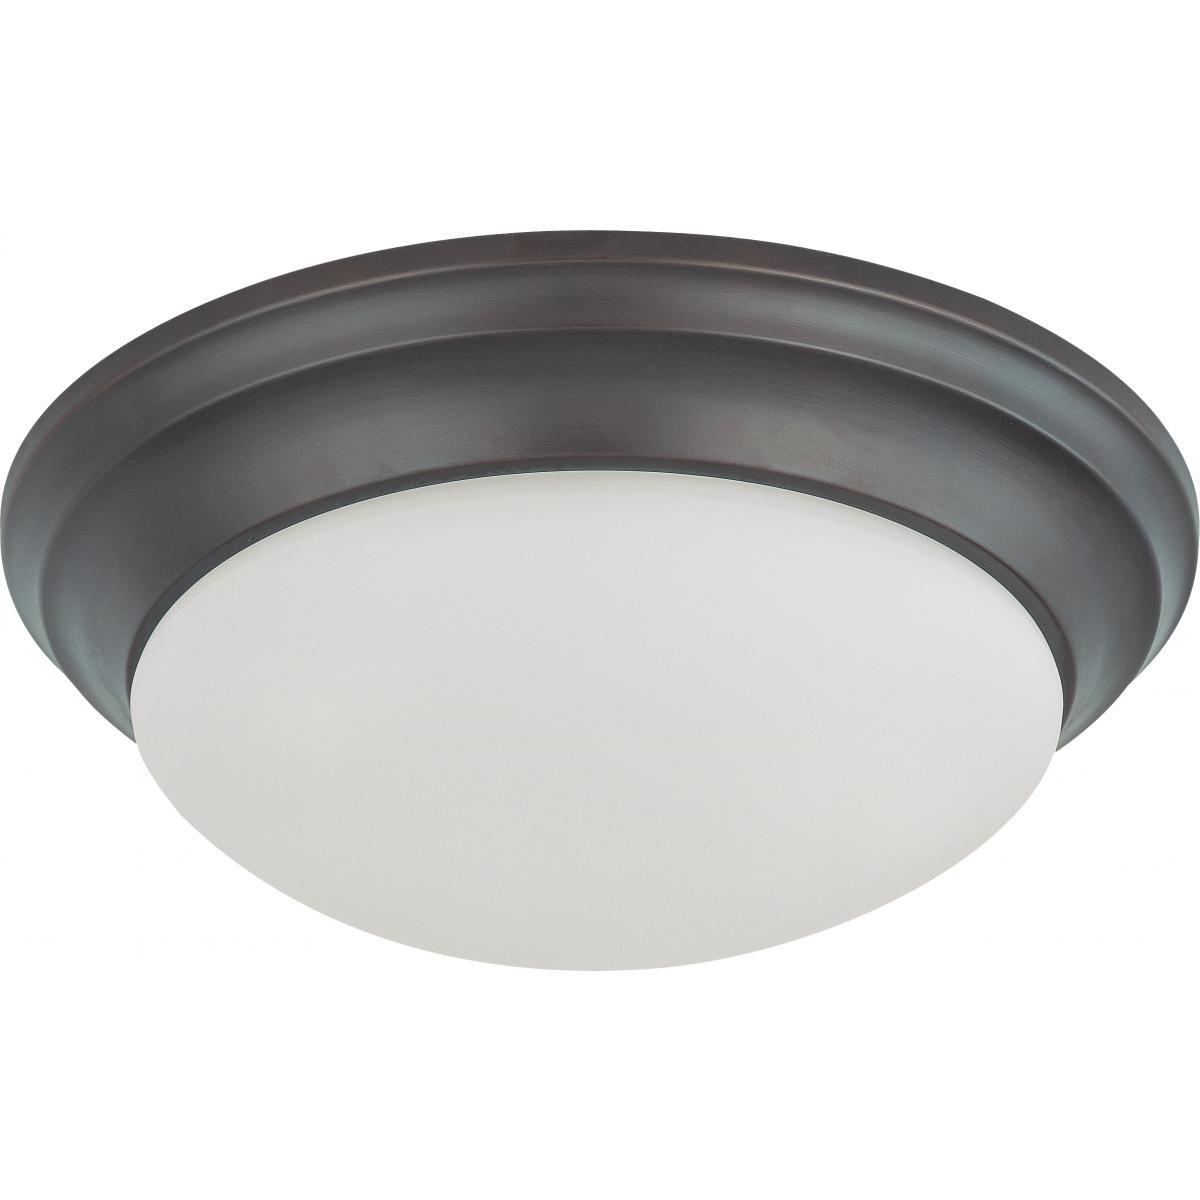 LED Light Fixture 14" Flush Mounted Frosted Glass Mahogany Bronze Finish 120-277 Volts Ceiling Nuvo Lighting 